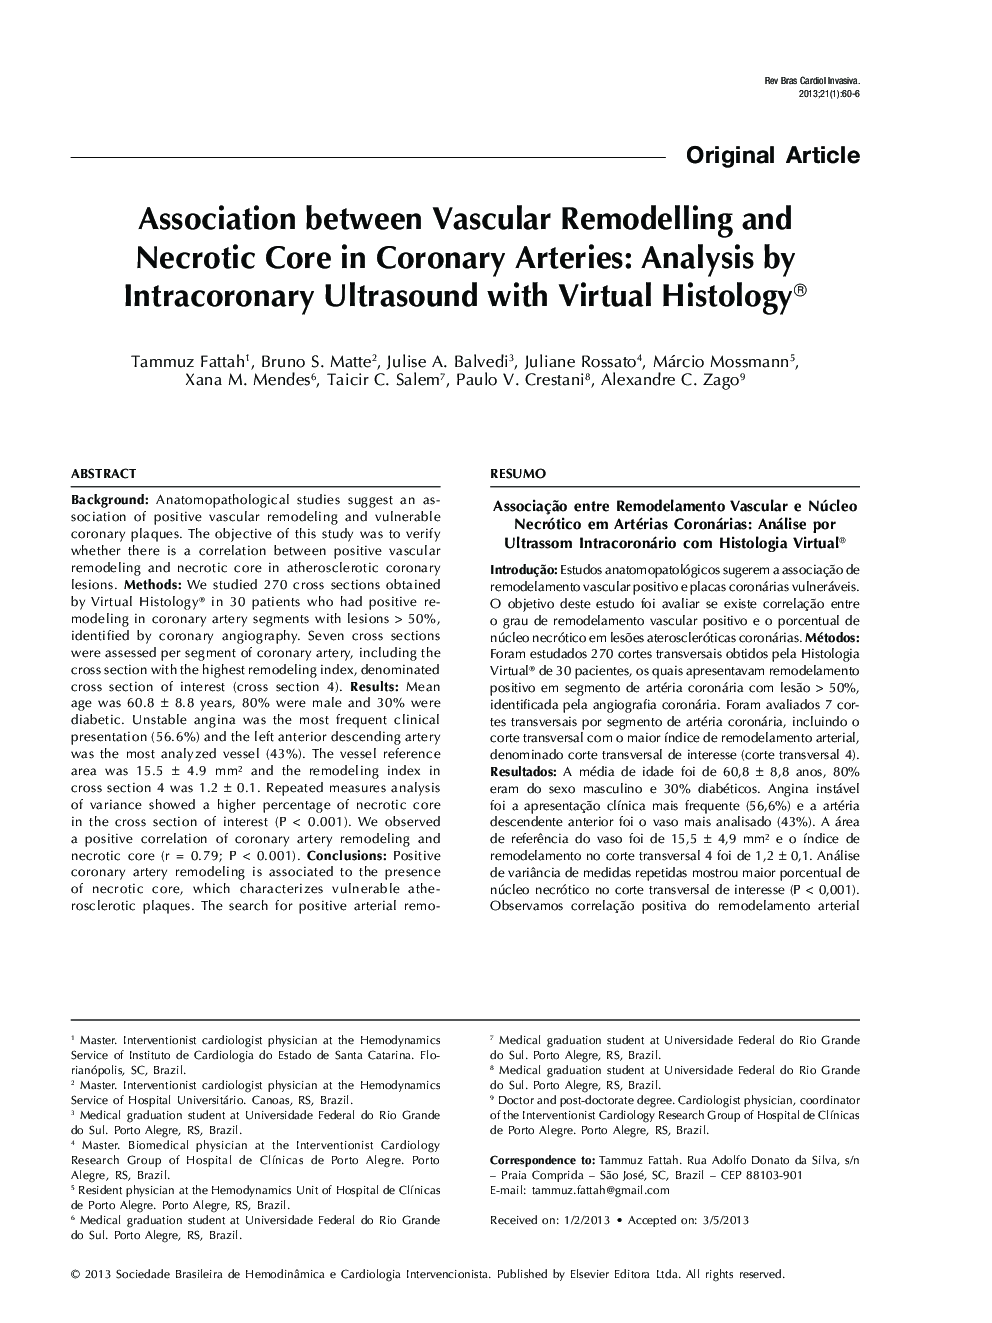 Association between Vascular Remodelling and Necrotic Core in Coronary Arteries: Analysis by Intracoronary Ultrasound with Virtual Histology®